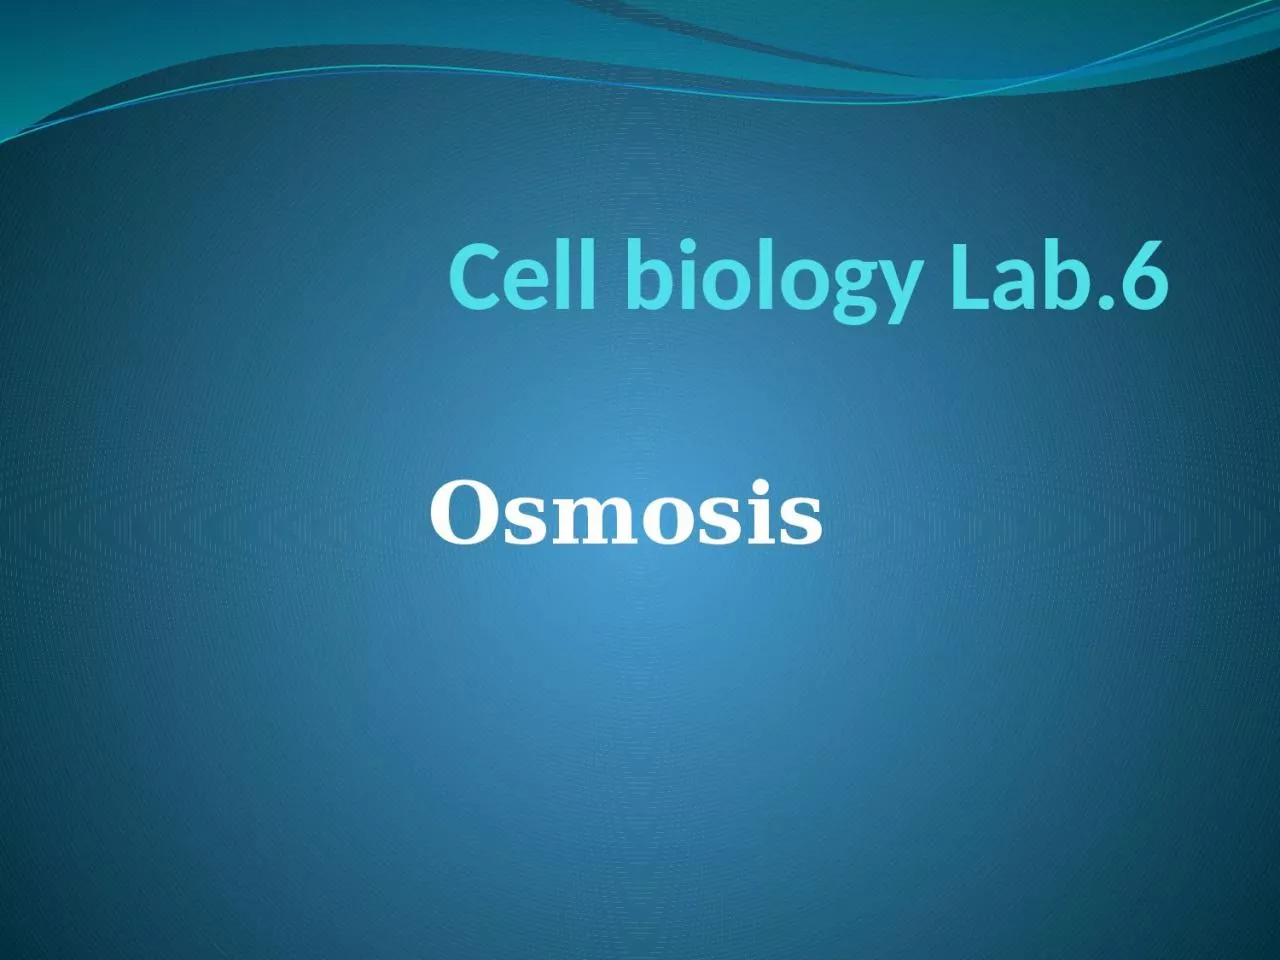 Cell biology Lab.6 Osmosis